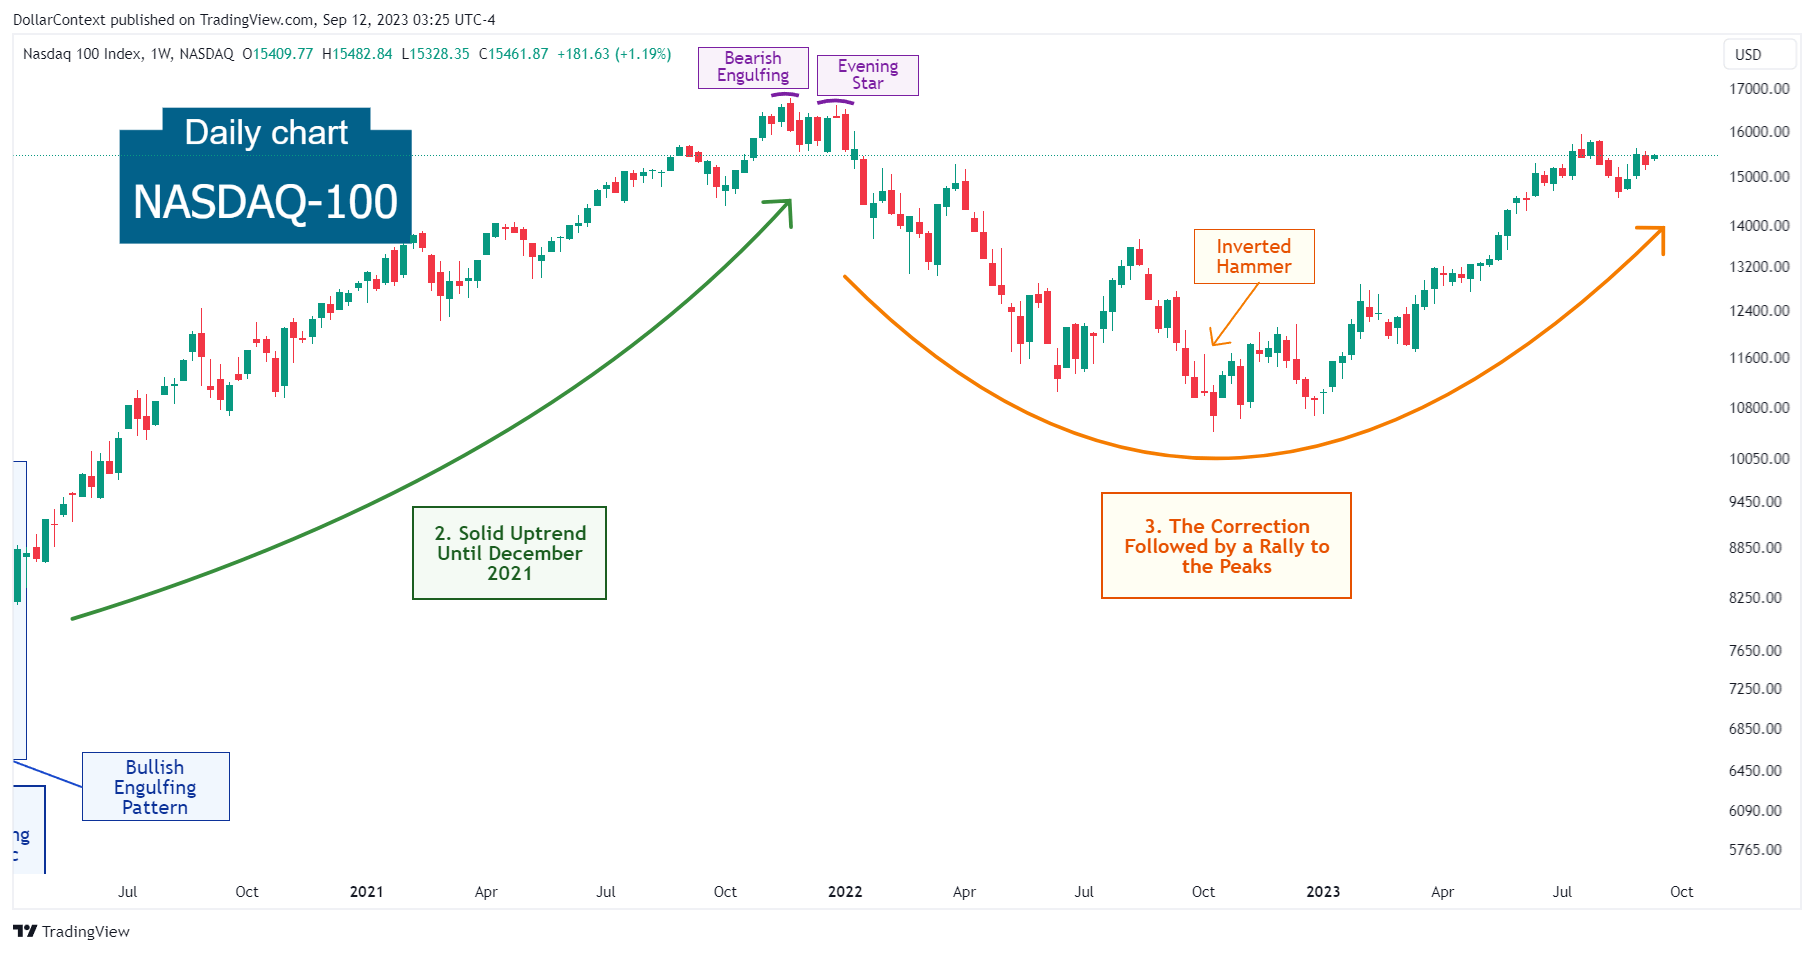 Nasdaq-100: The Correction and Subsequent Rebound (Weekly Chart)